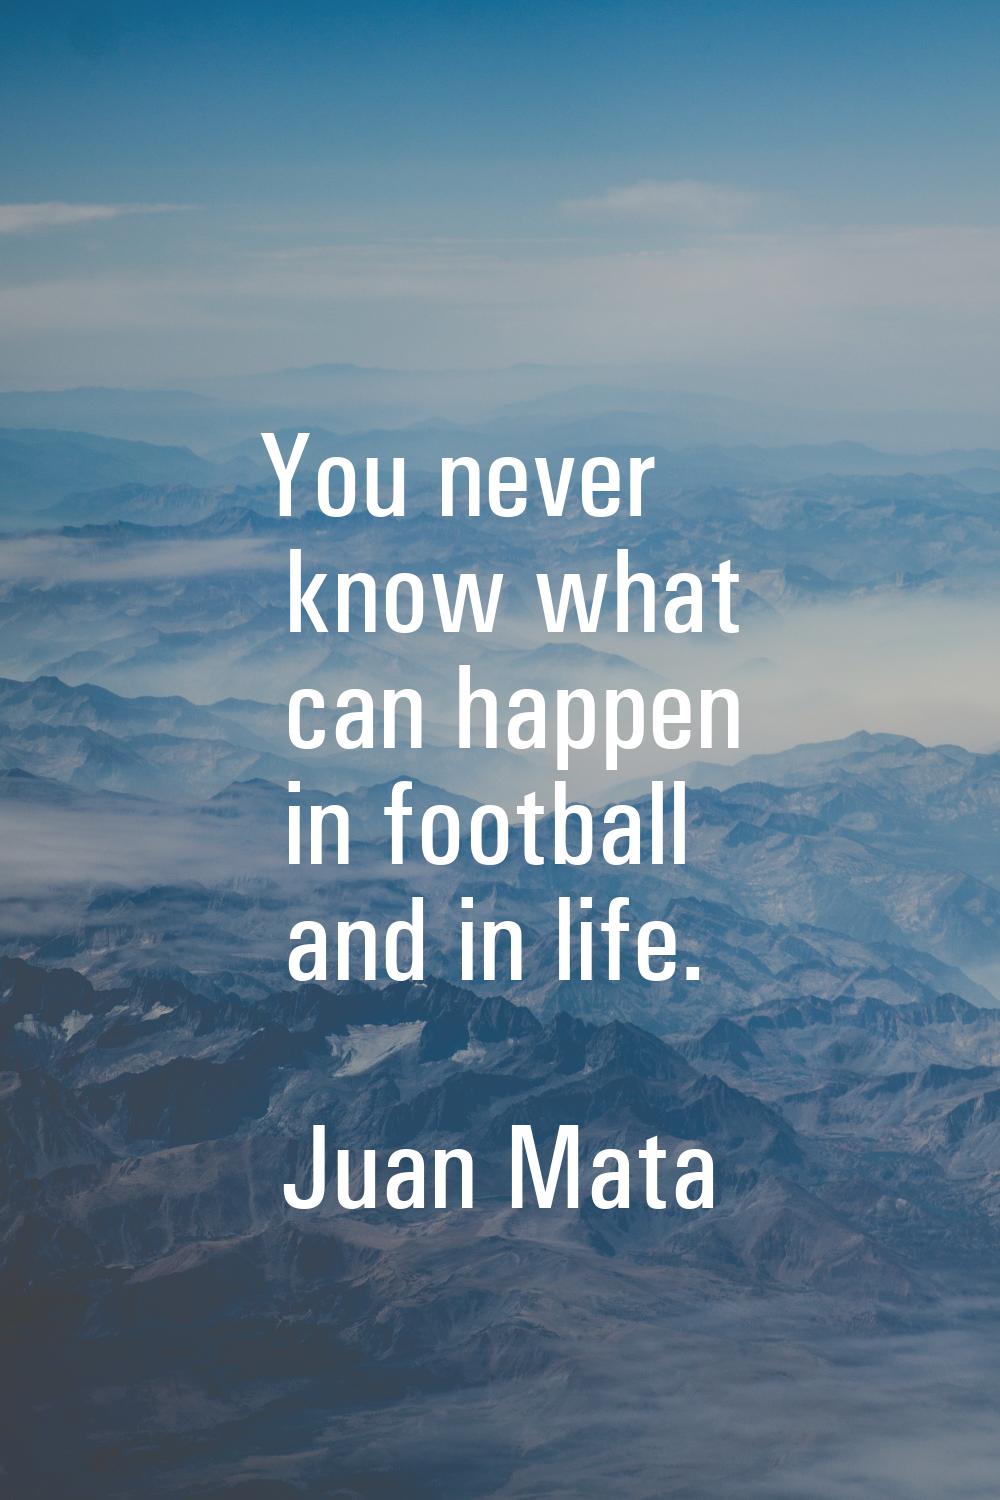 You never know what can happen in football and in life.